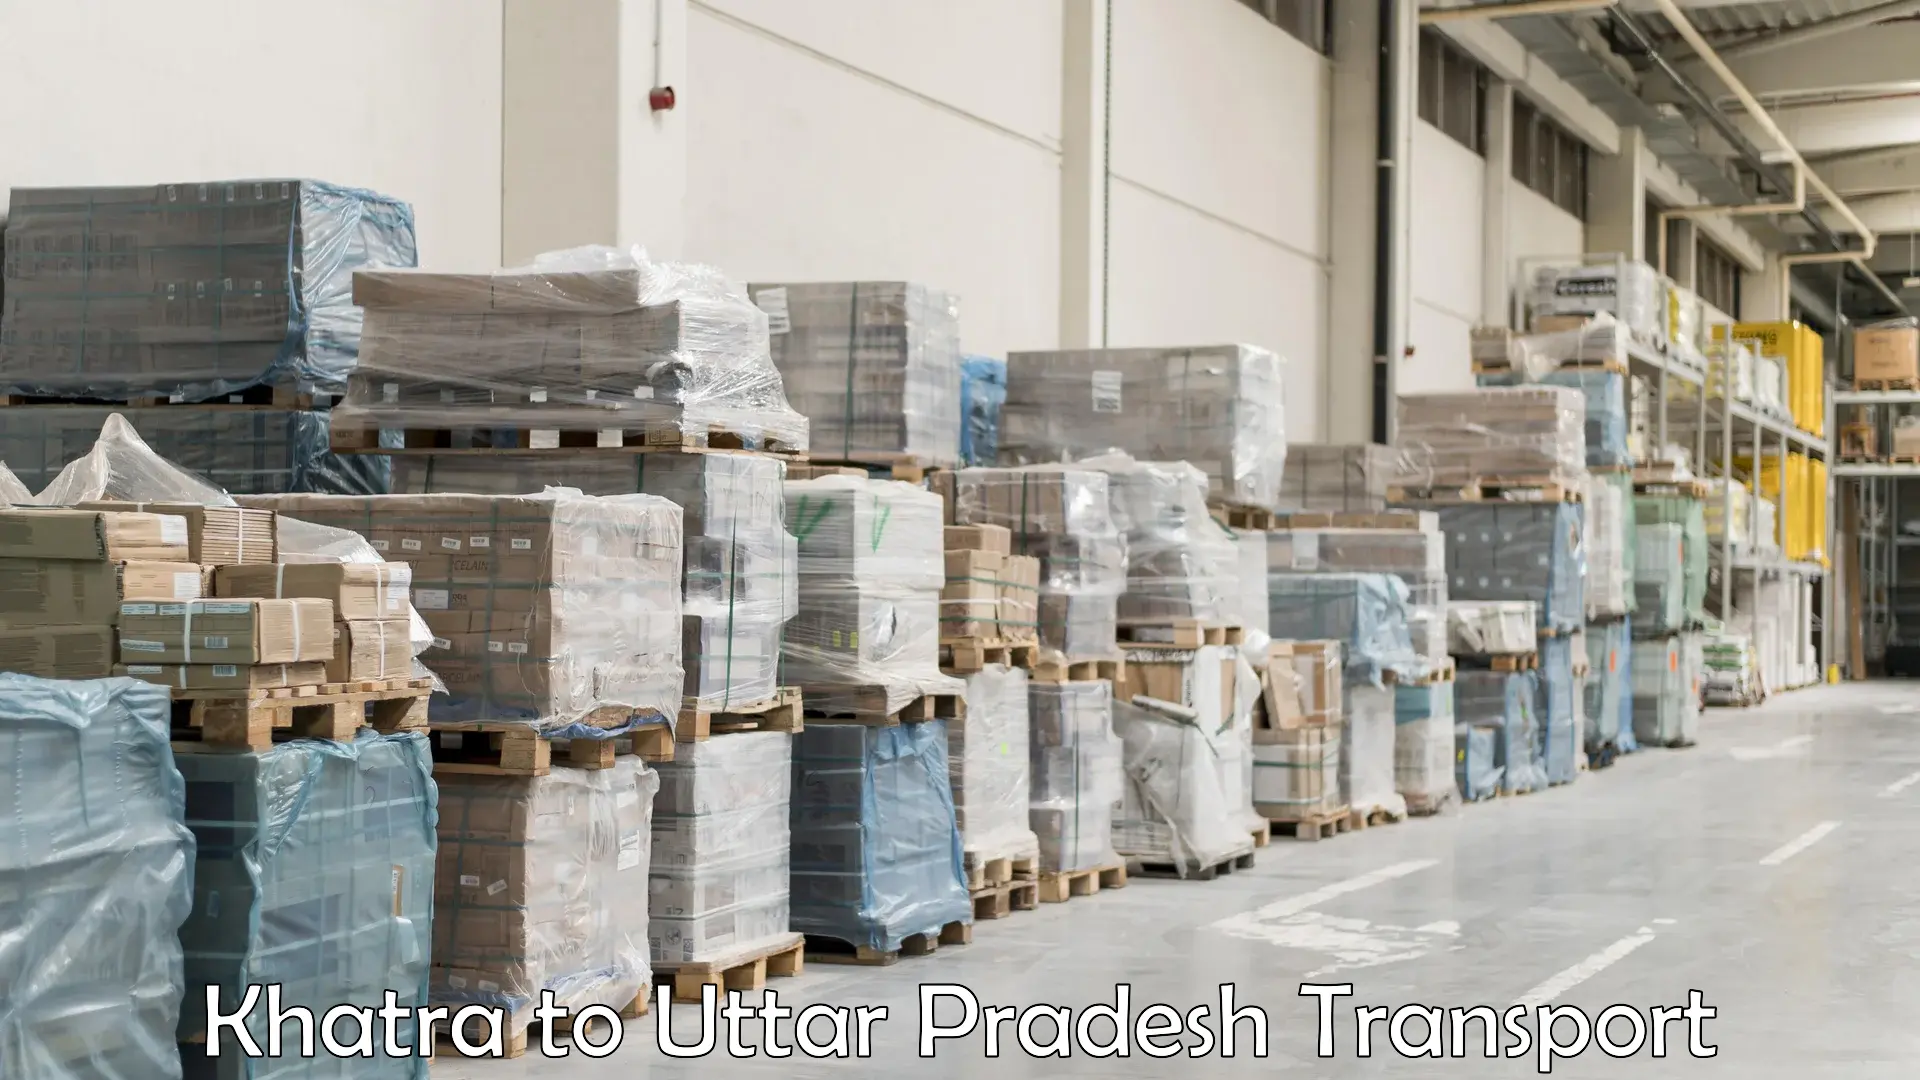 Part load transport service in India Khatra to Khair